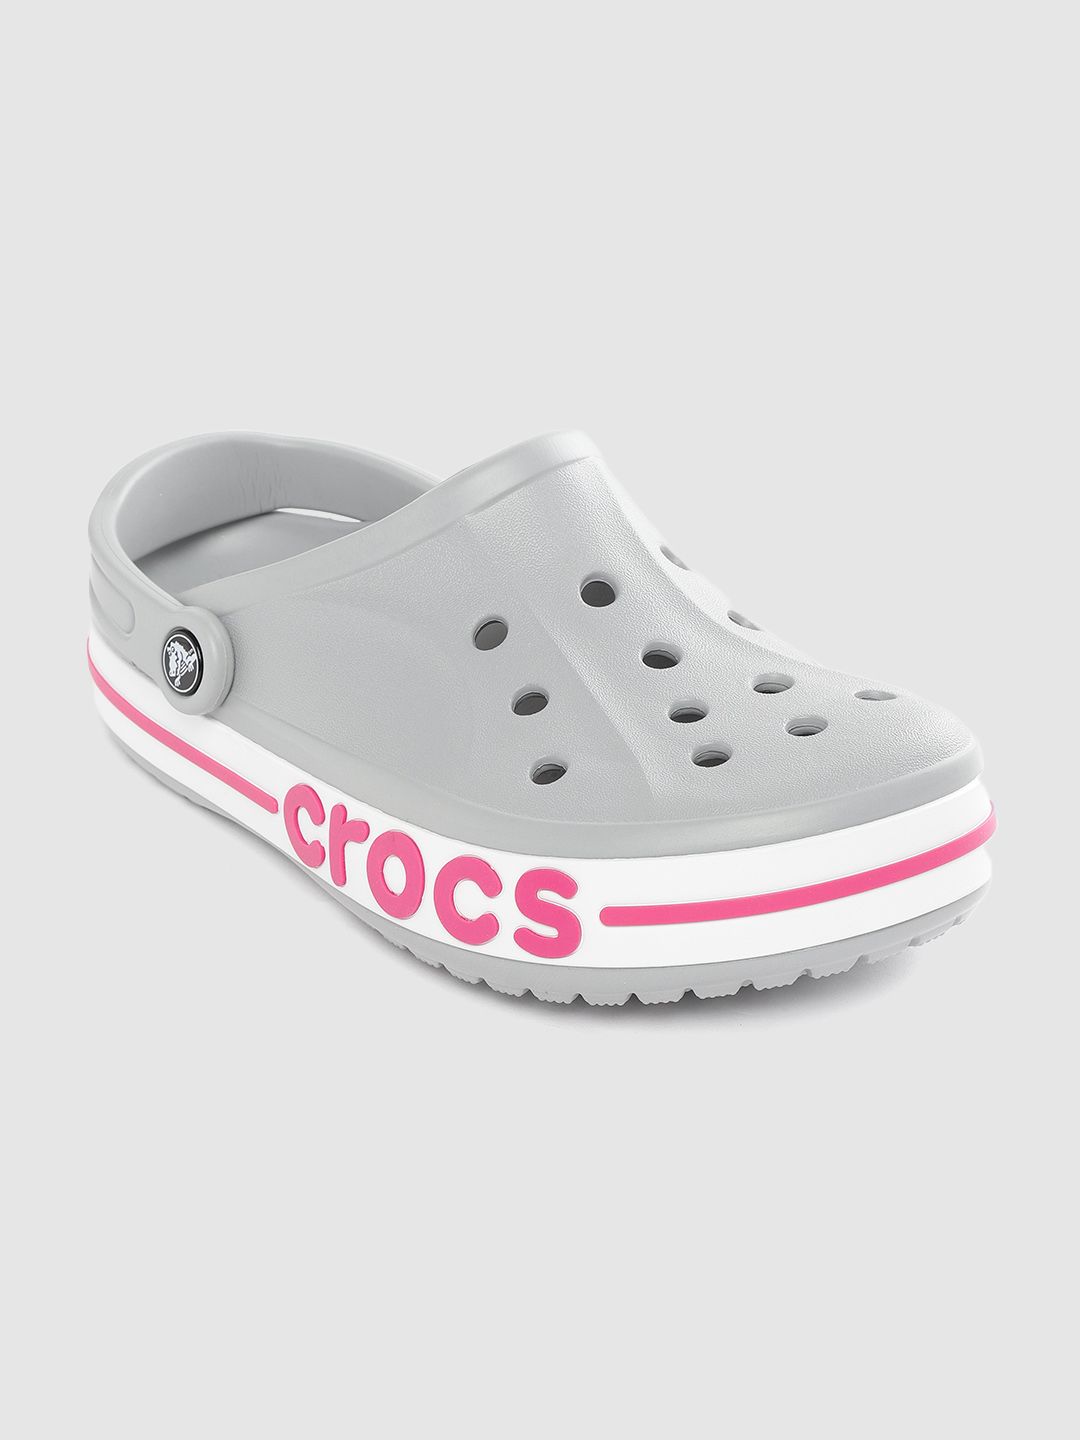 Crocs Unisex Grey Solid Cut-Out Clogs Price in India